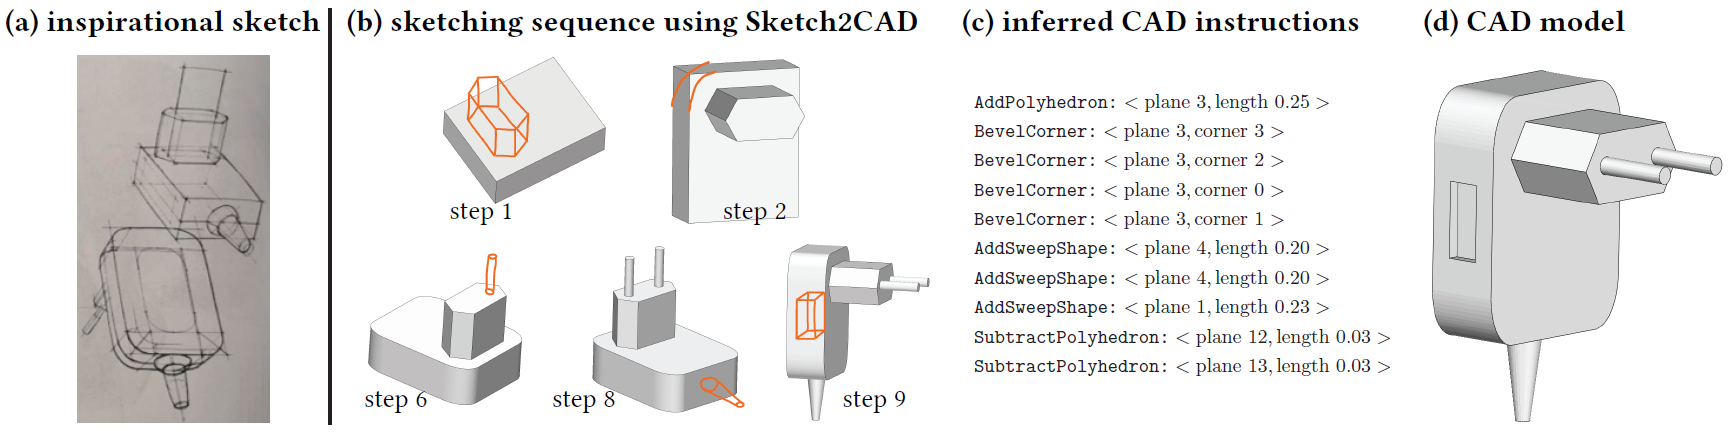 Industrial designers commonly decompose complex shapes into box-like primitives, which they refine by drawing cuts and roundings, or by adding and substracting smaller parts (a). Users of Sketch2CAD follow similar sketching steps (b), which our system interprets as parametric modeling operations (c) to automatically output a precise, compact, and editable CAD model (d).